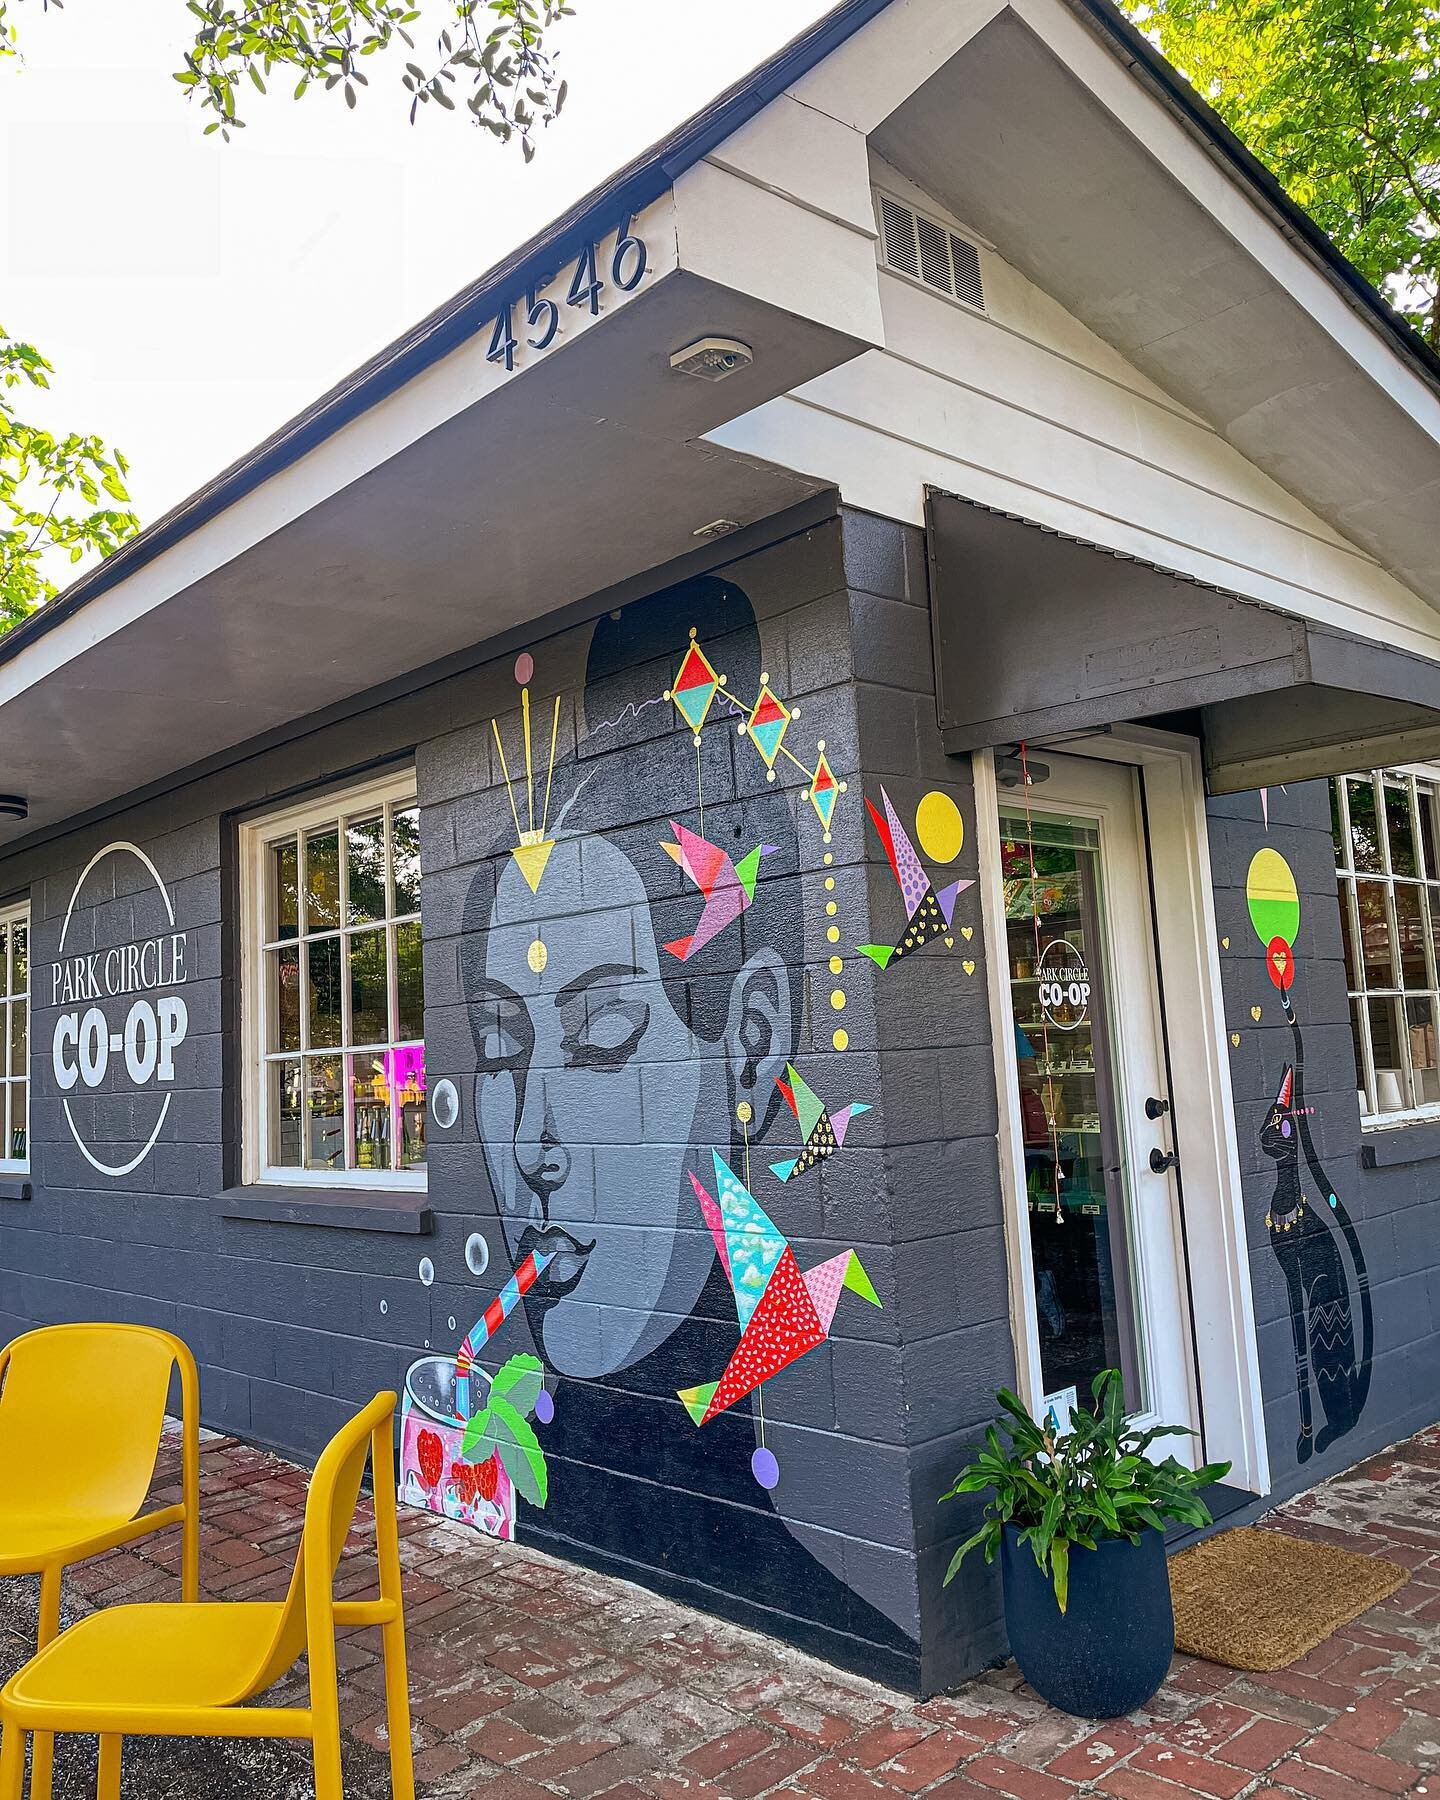 Happy opening day to our friends at the @parkcirclecoop!! 🥳

Check them out at 4546 Durant Ave from 7-3 for all your breakfast &amp; lunch needs! 

#parkcirclecoop #supportlocal #grandopening #localcharleston #charleston #parkcircle #eatlocal #local